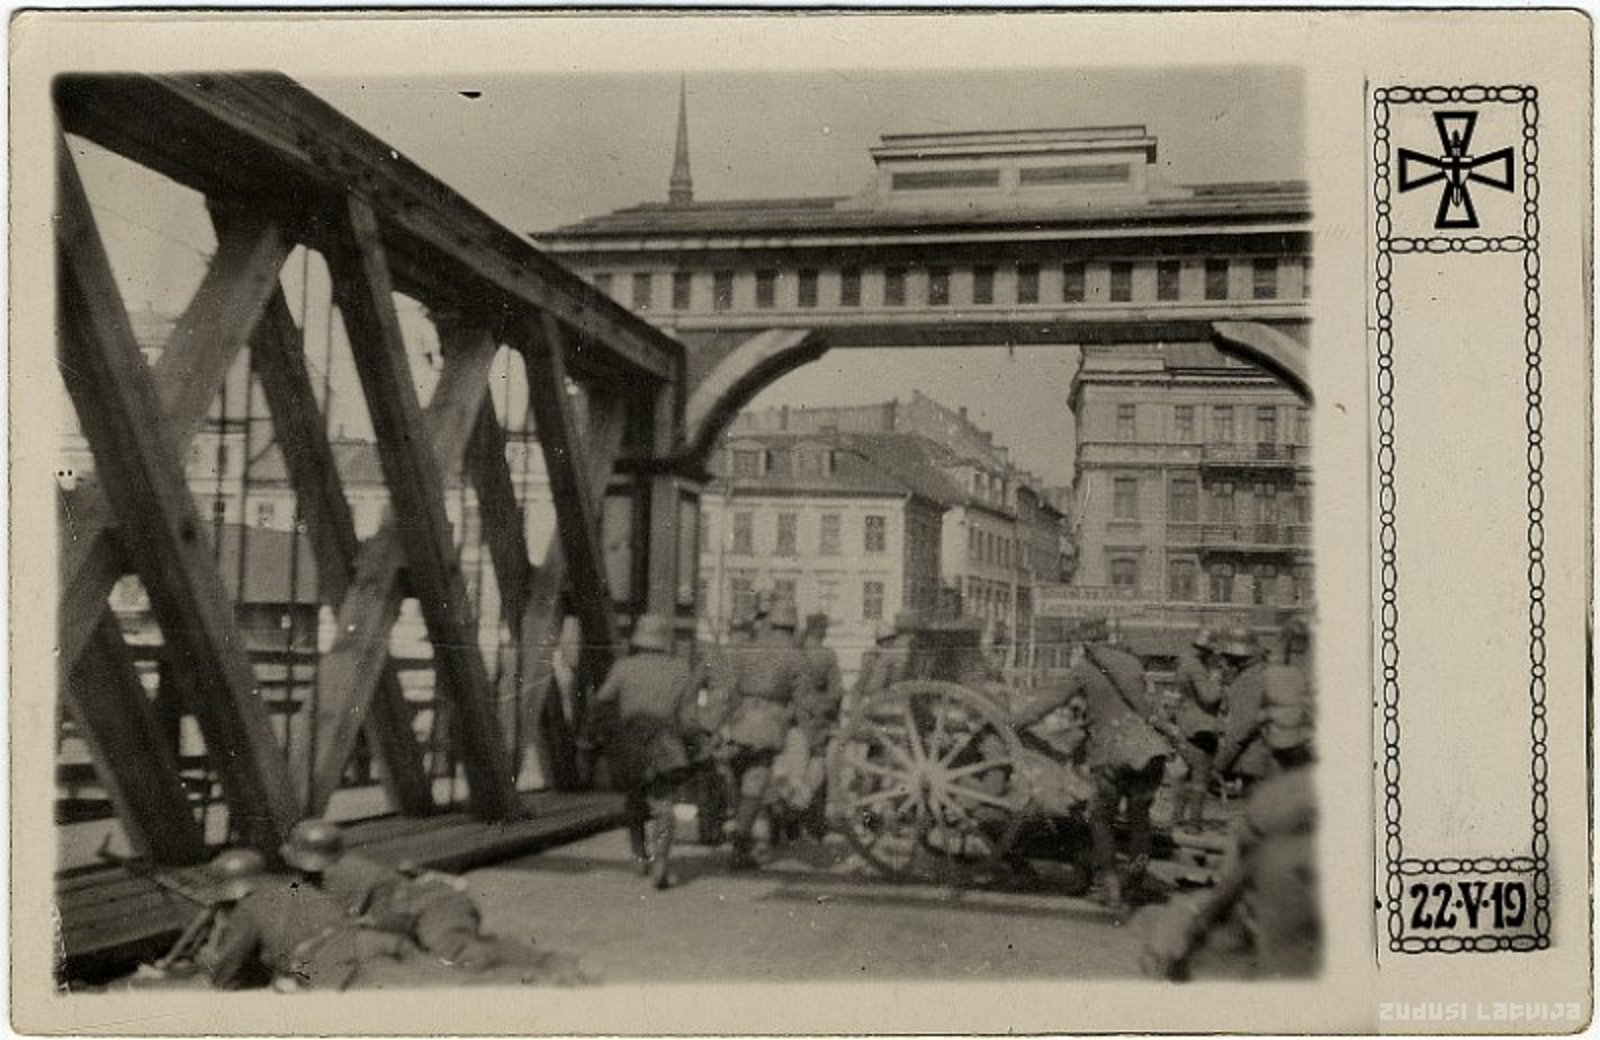 Arrival of the Baltic Landeswave Force in Riga May 22, 1919